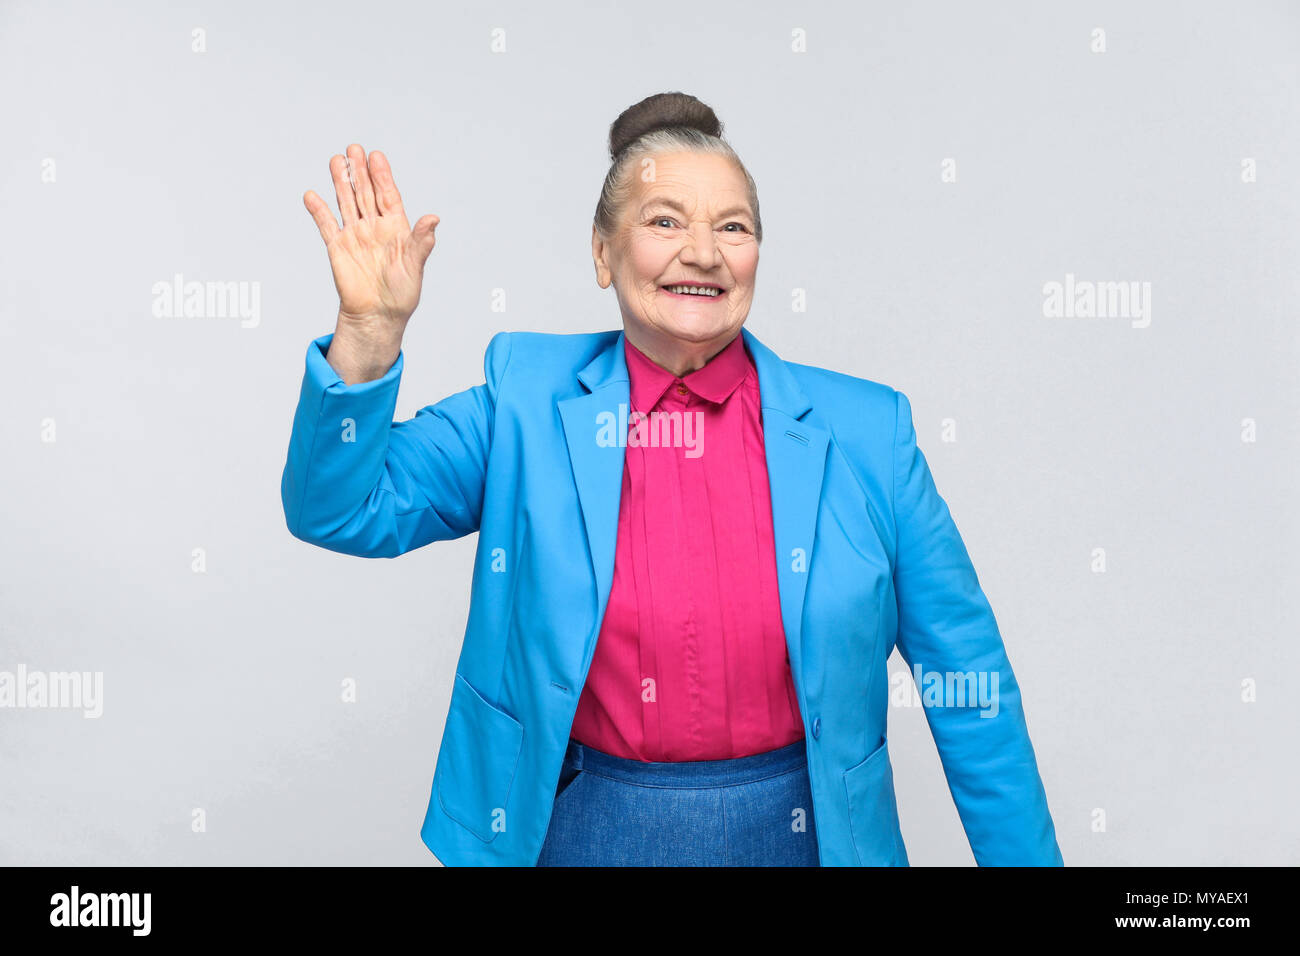 Happiness woman showing hi sign and toothy smiling. Emotion and feelings, Portrait of handsome grandmother with light blue suit standing with collecte Stock Photo